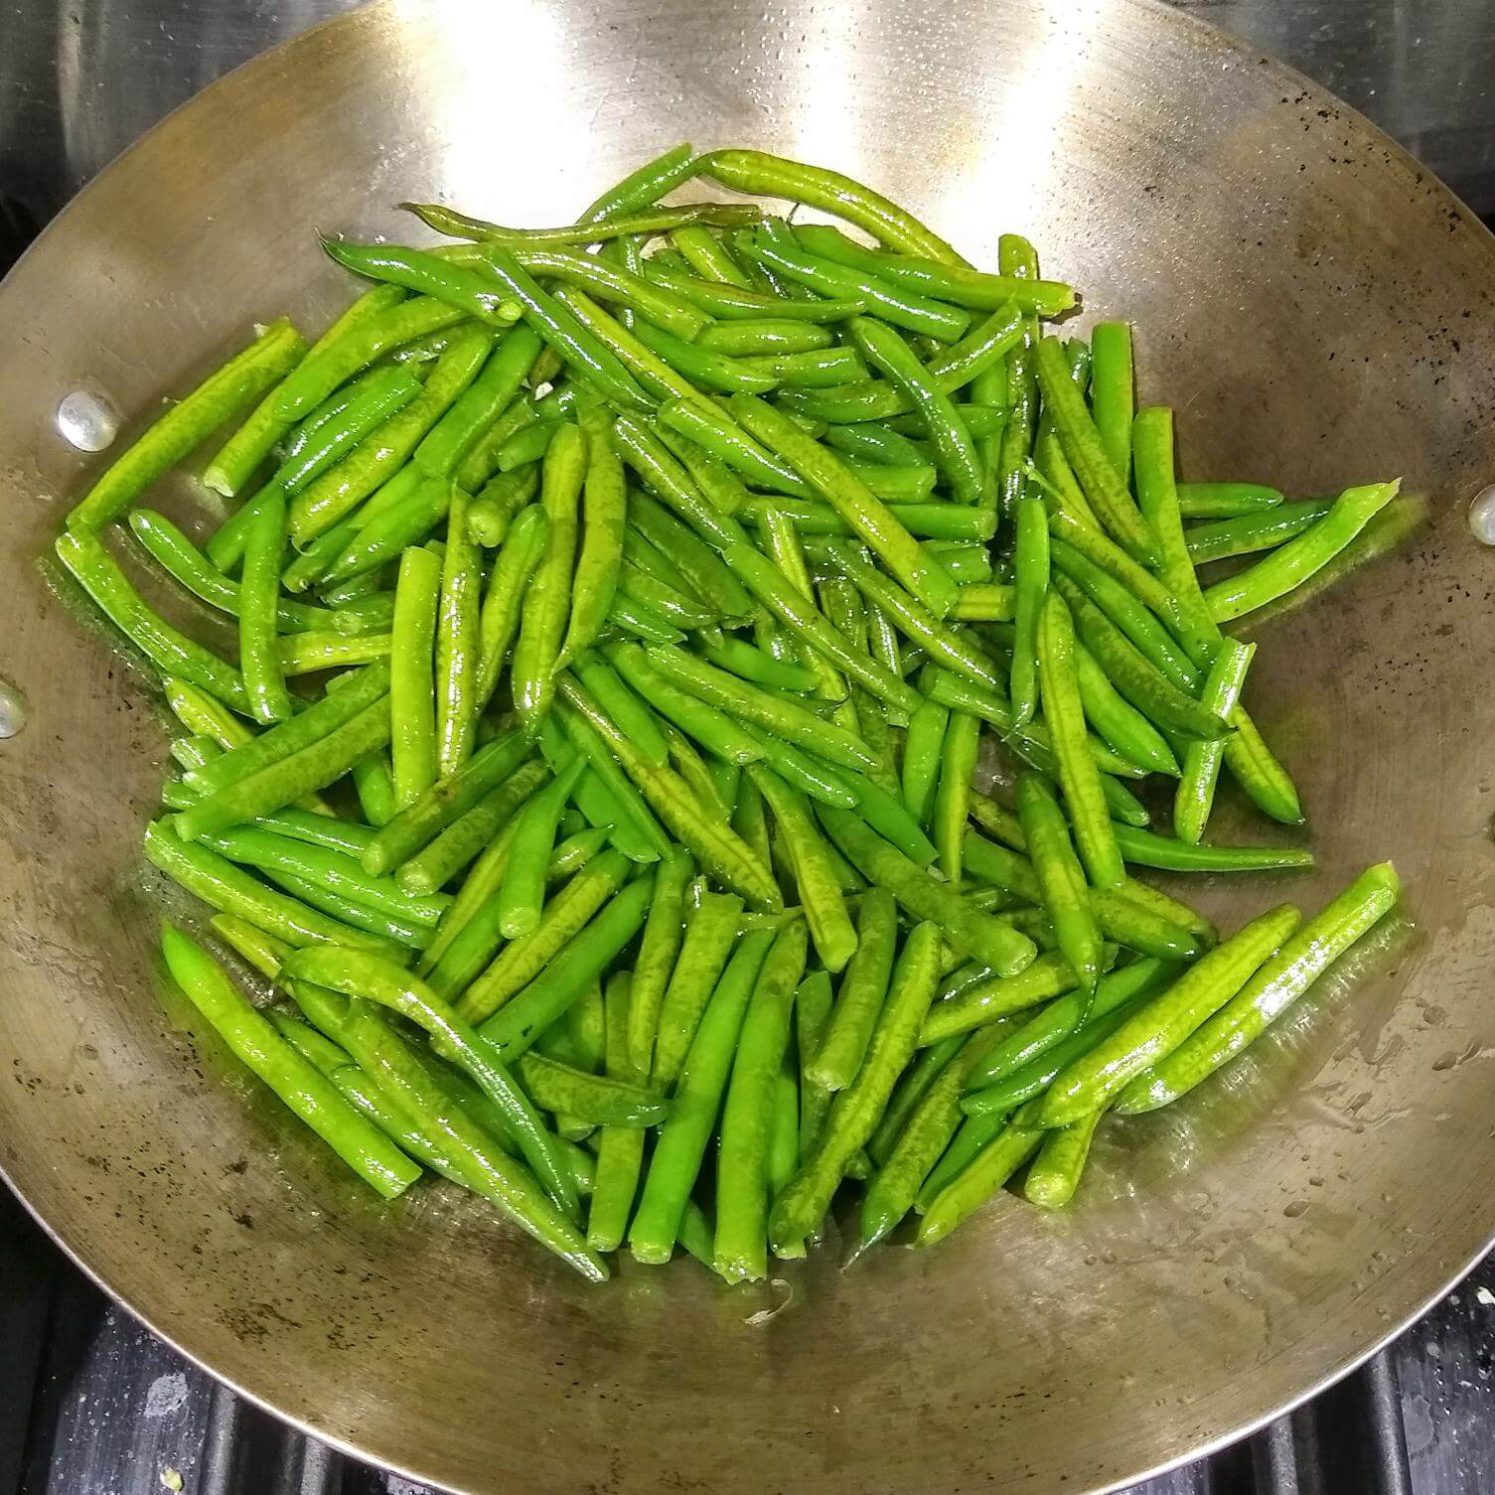 Frying the Green Beans